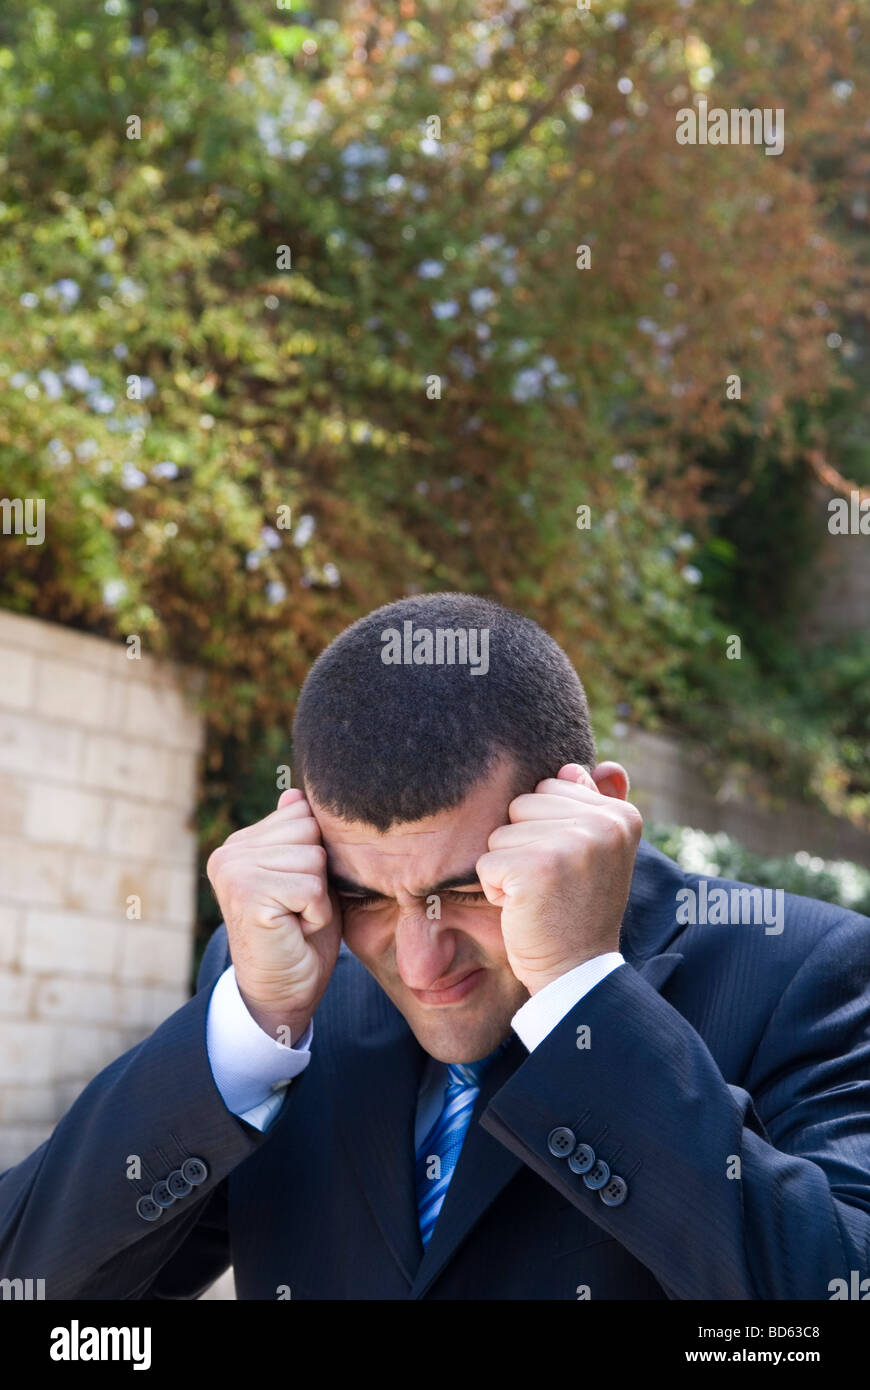 Business man head in hands outdoors Banque D'Images